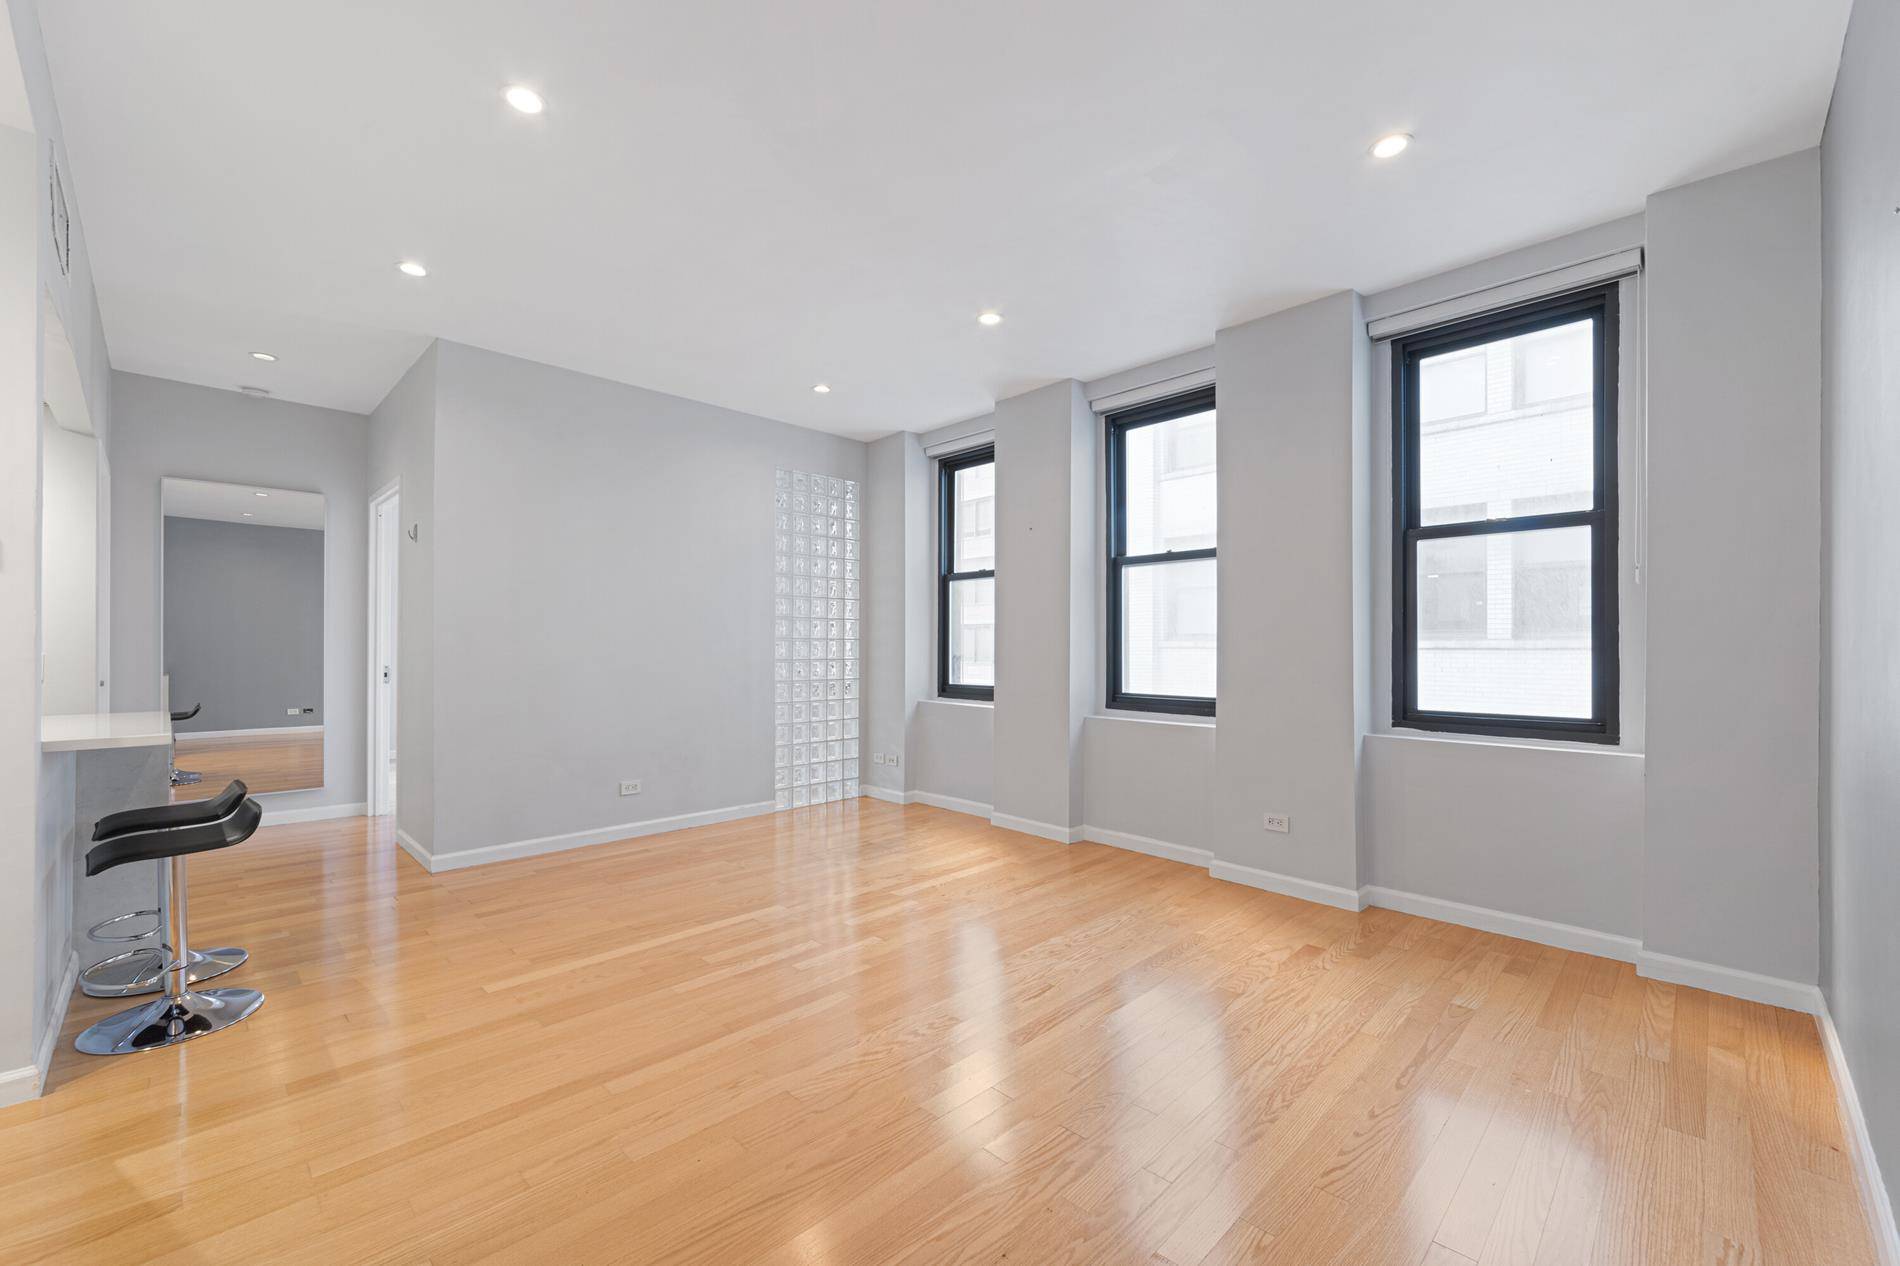 Enjoy only 1 of 5 apartments at 56 Pine with open views facing West, flooding the apartment with light !